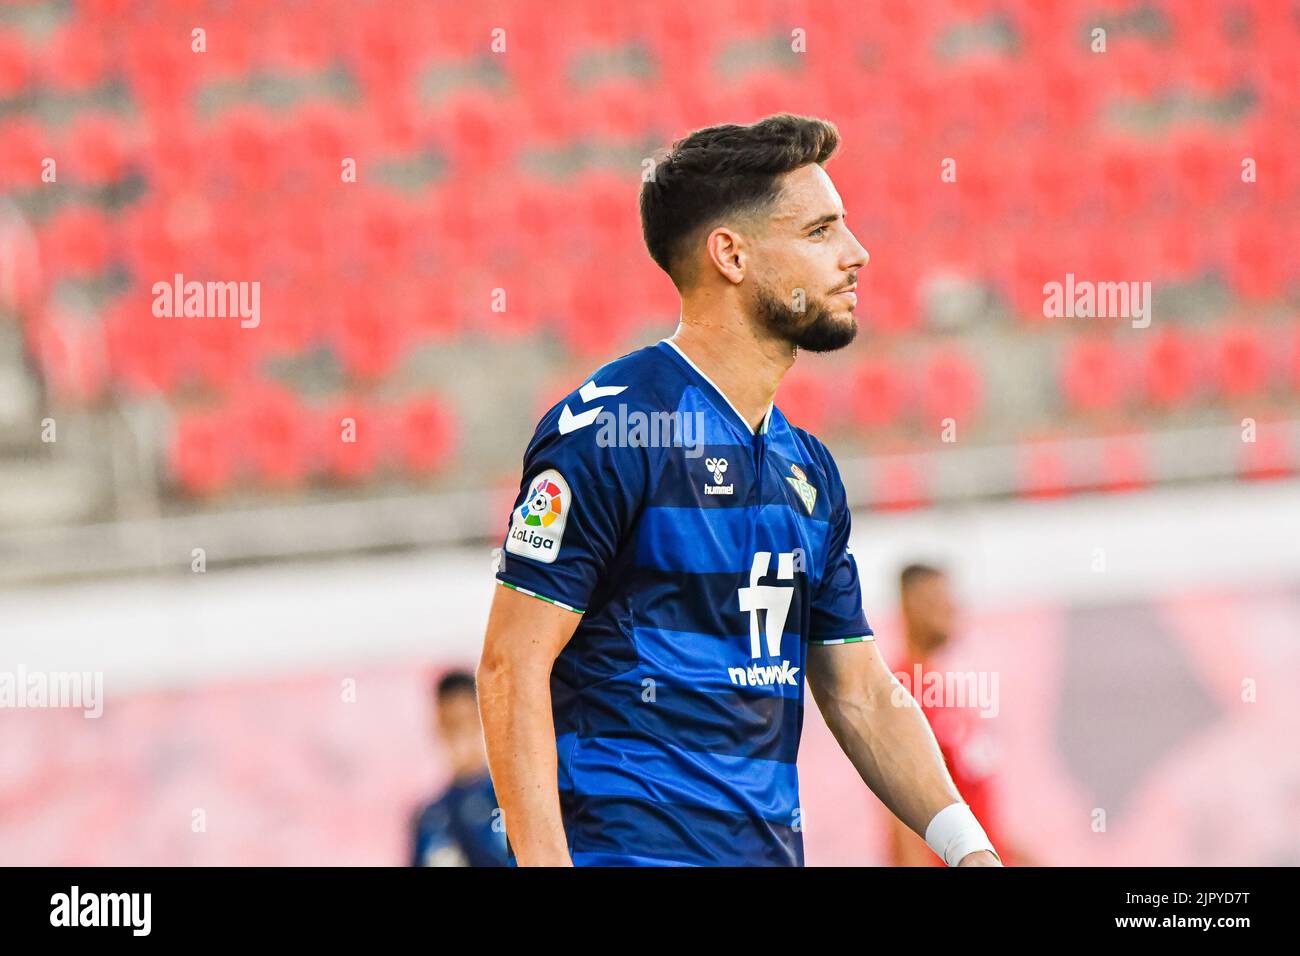 MALLORCA, SPAIN - AUGUST 20: Alex Moreno of Real Betis during in the match between RCD Mallorca and Real Betis of La Liga Santander on August 20, 2022 at Visit Mallorca Stadium Son Moix in Mallorca, Spain. (Photo by Samuel Carreño/PxImages) Stock Photo